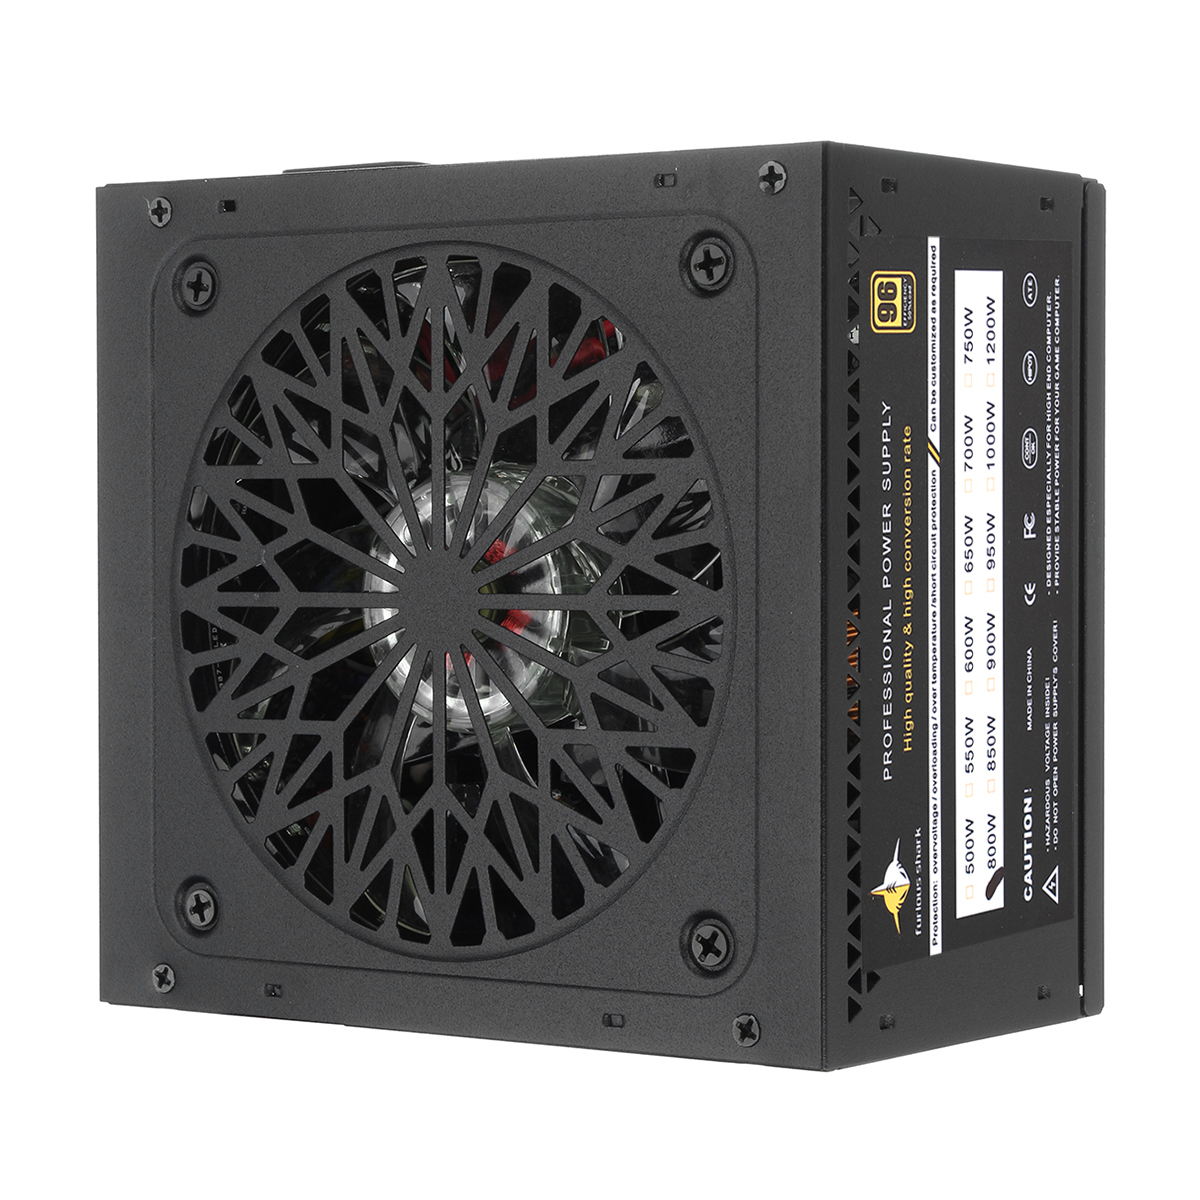 Find 800W 110/220V PC Power Supply Passive PFC Power Supply 120MM RGB fan PC Computer Gaming Power Supply EMI Temperature Control for Sale on Gipsybee.com with cryptocurrencies